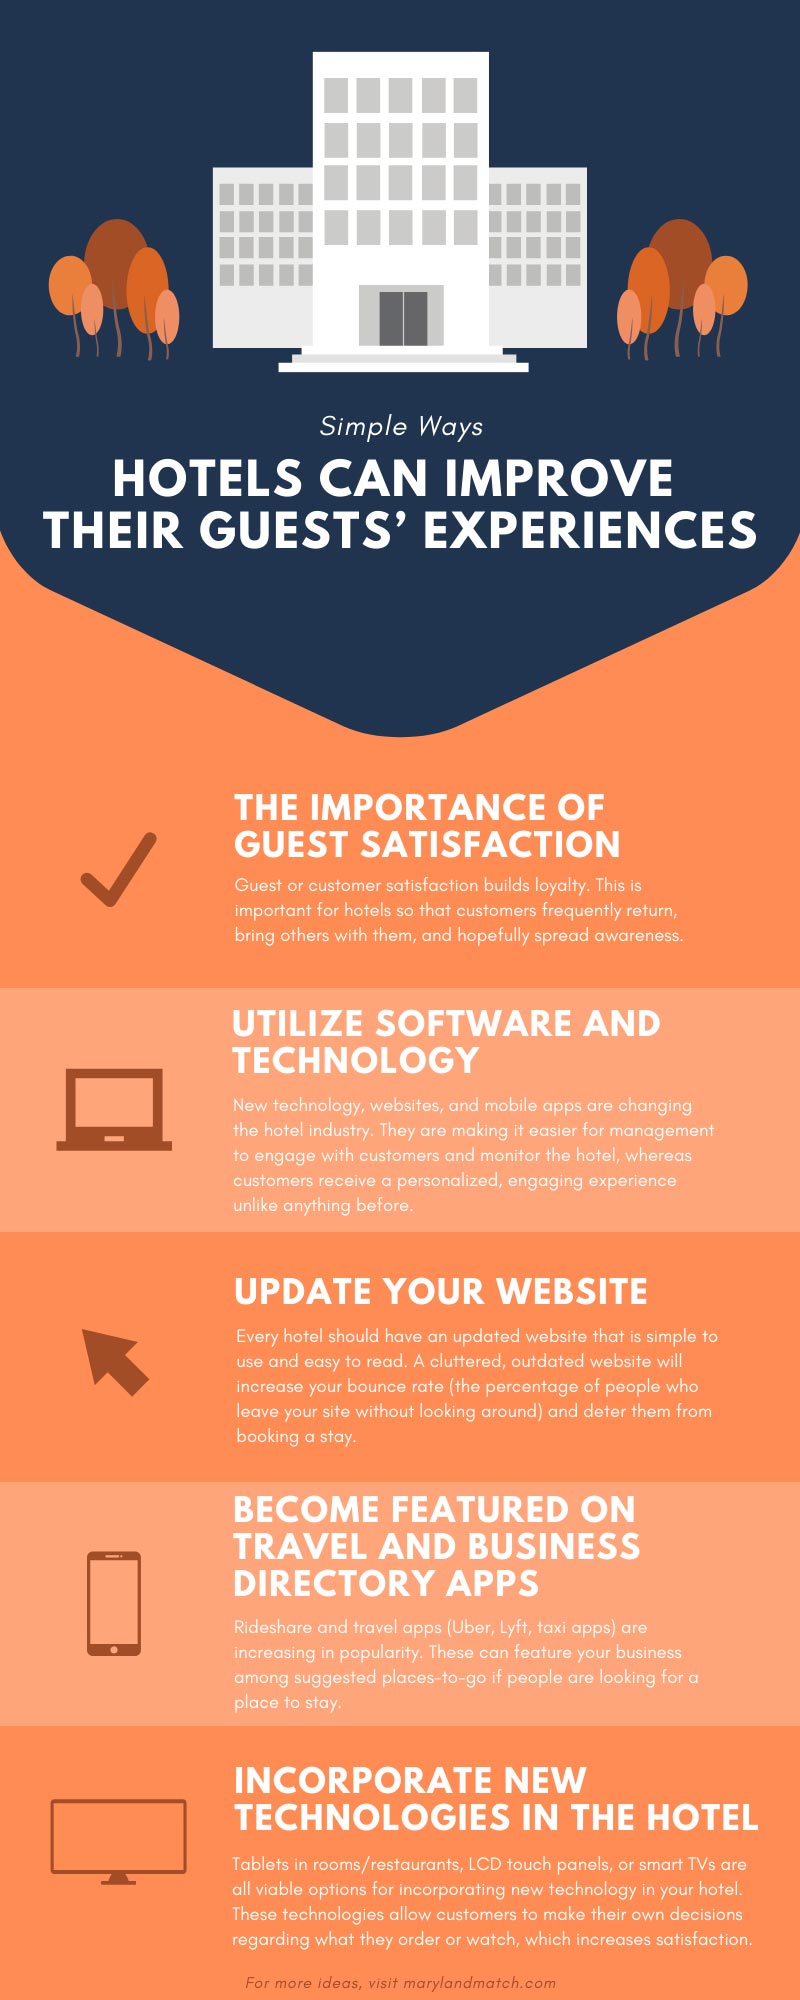 Simple Ways Hotels Can Improve Their Guests’ Experiences infographic